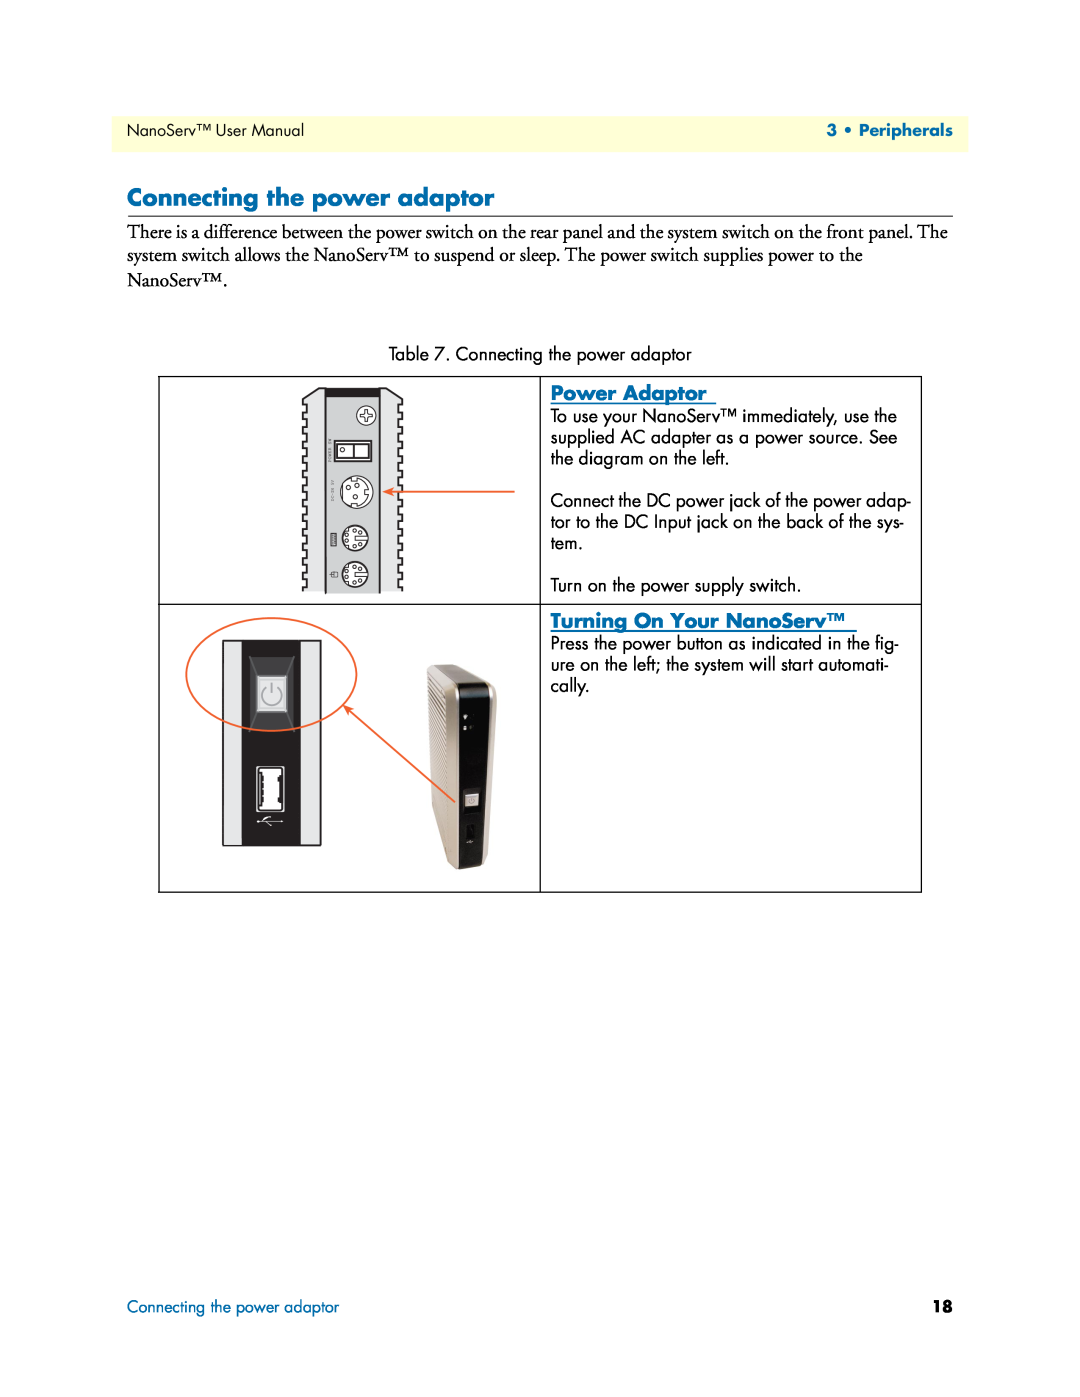 Patton electronic 07M6070-UM user manual Connecting the power adaptor, Power Adaptor, Turning On Your NanoServ 